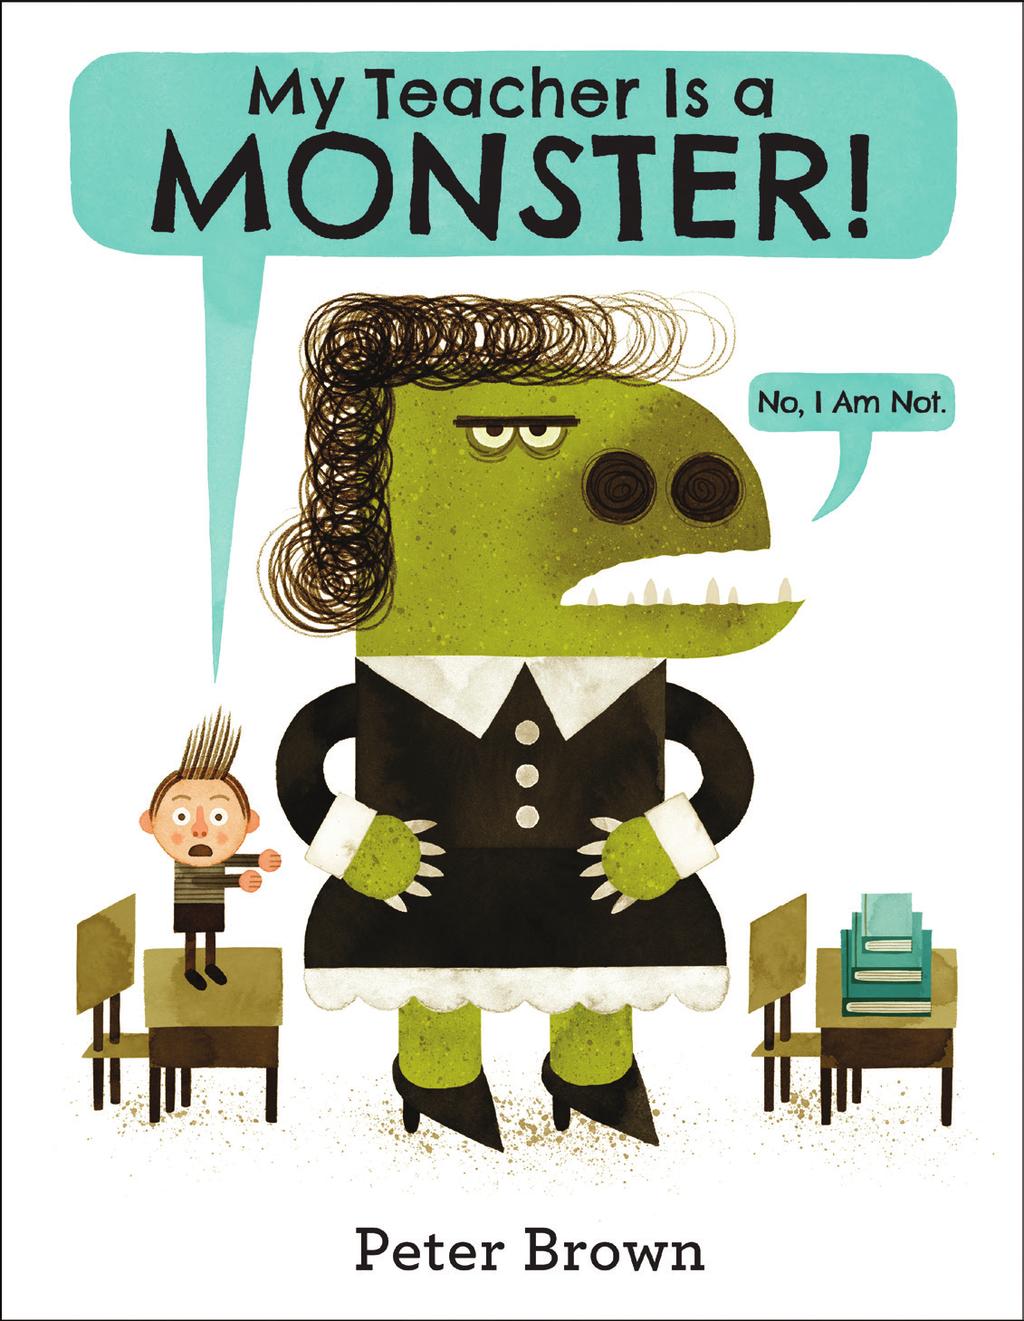 Tiger Goes Wild ISBN 97 8-0 -316-0 Monsters are not always what they seem. BOBBY HAS THE WORST TEACHER. She stomps. She yells.